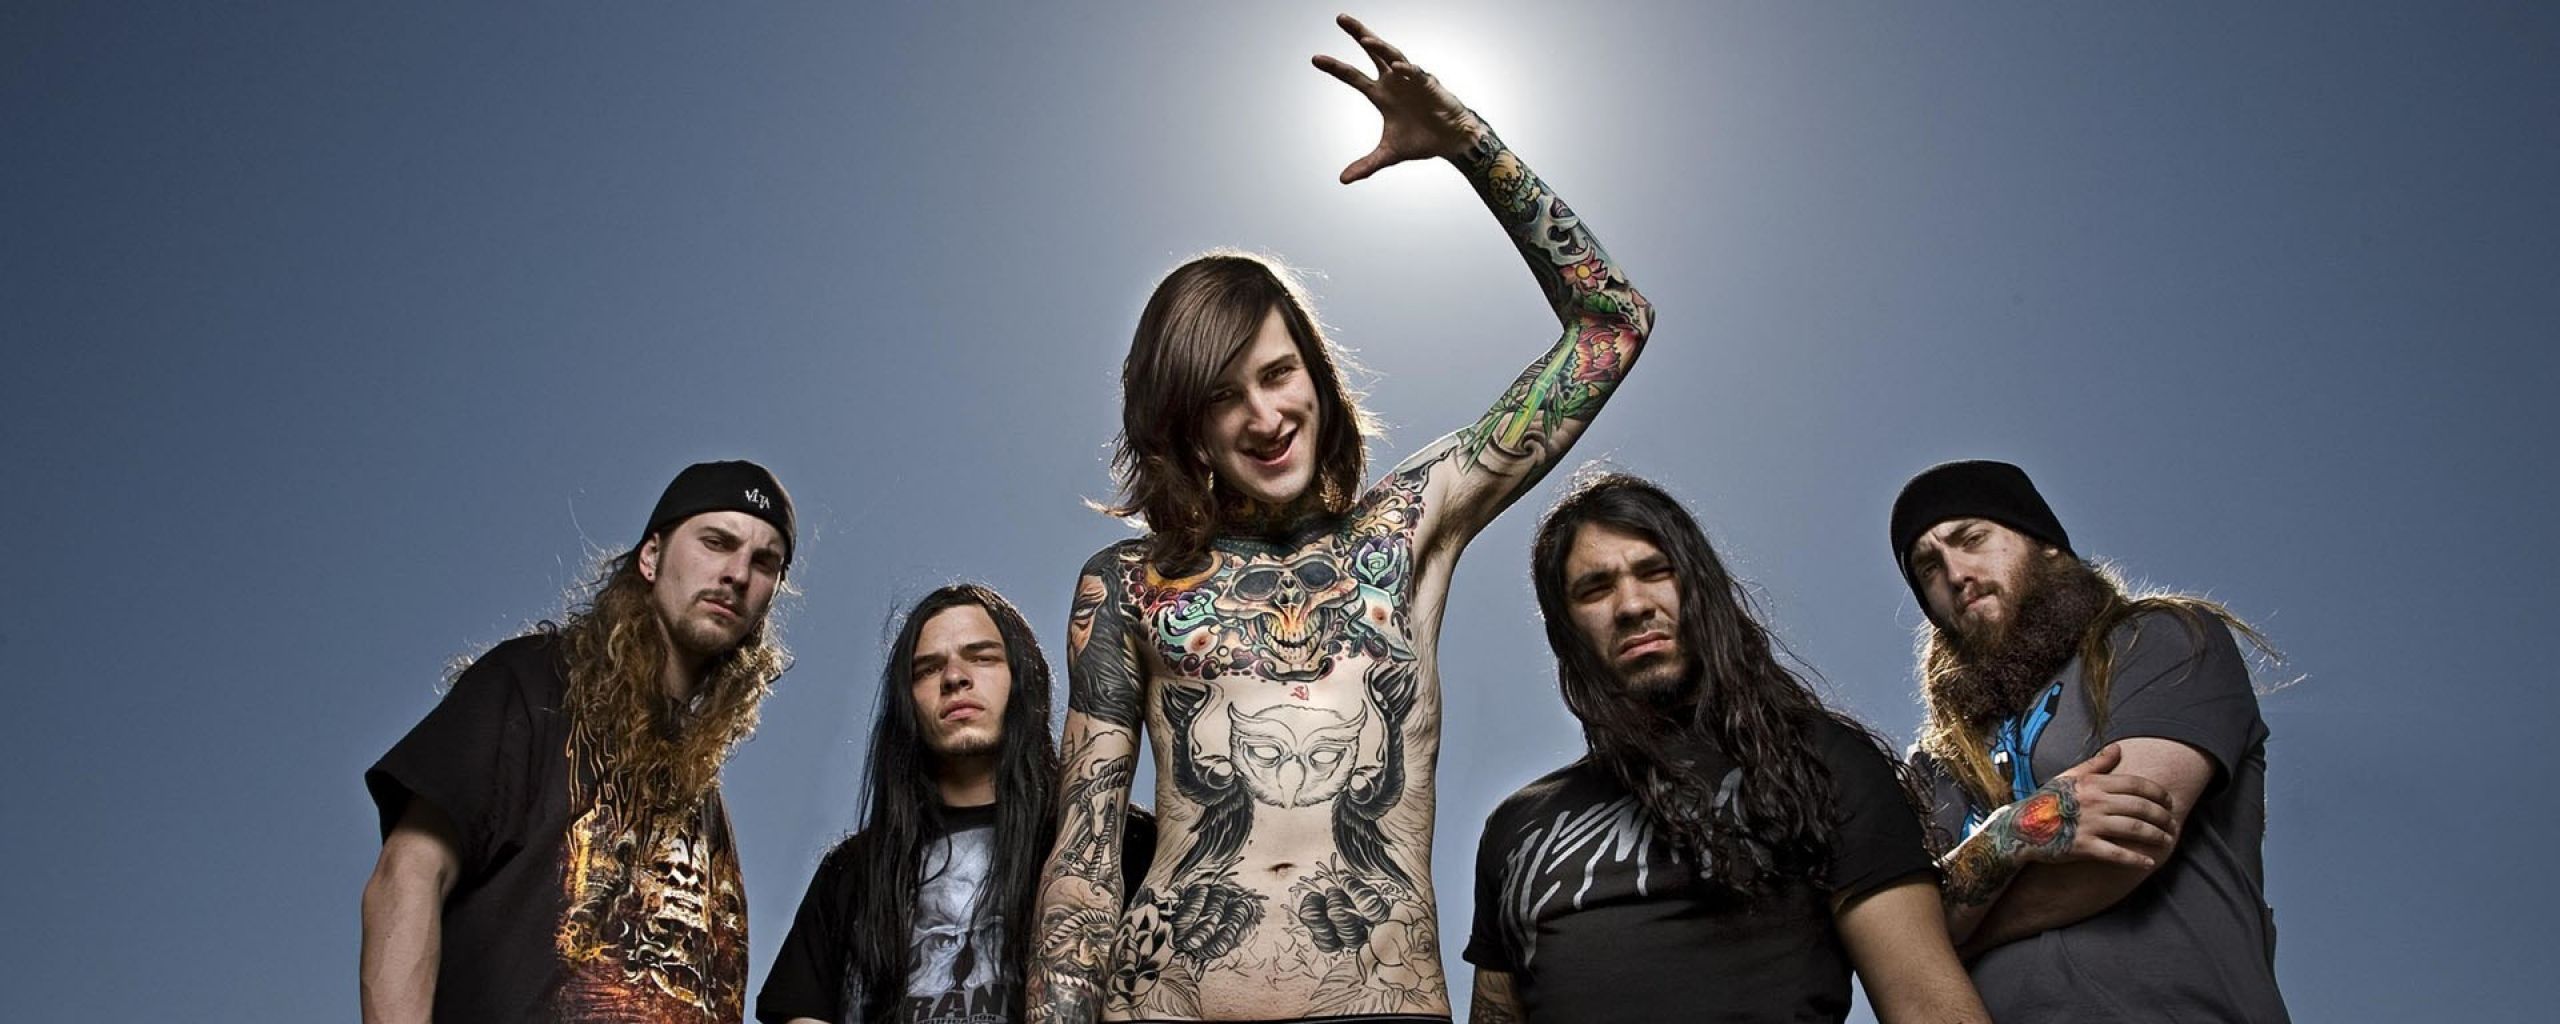 Download Wallpaper 2560x1024 Suicide silence, Tattoo, Rockers, Sky